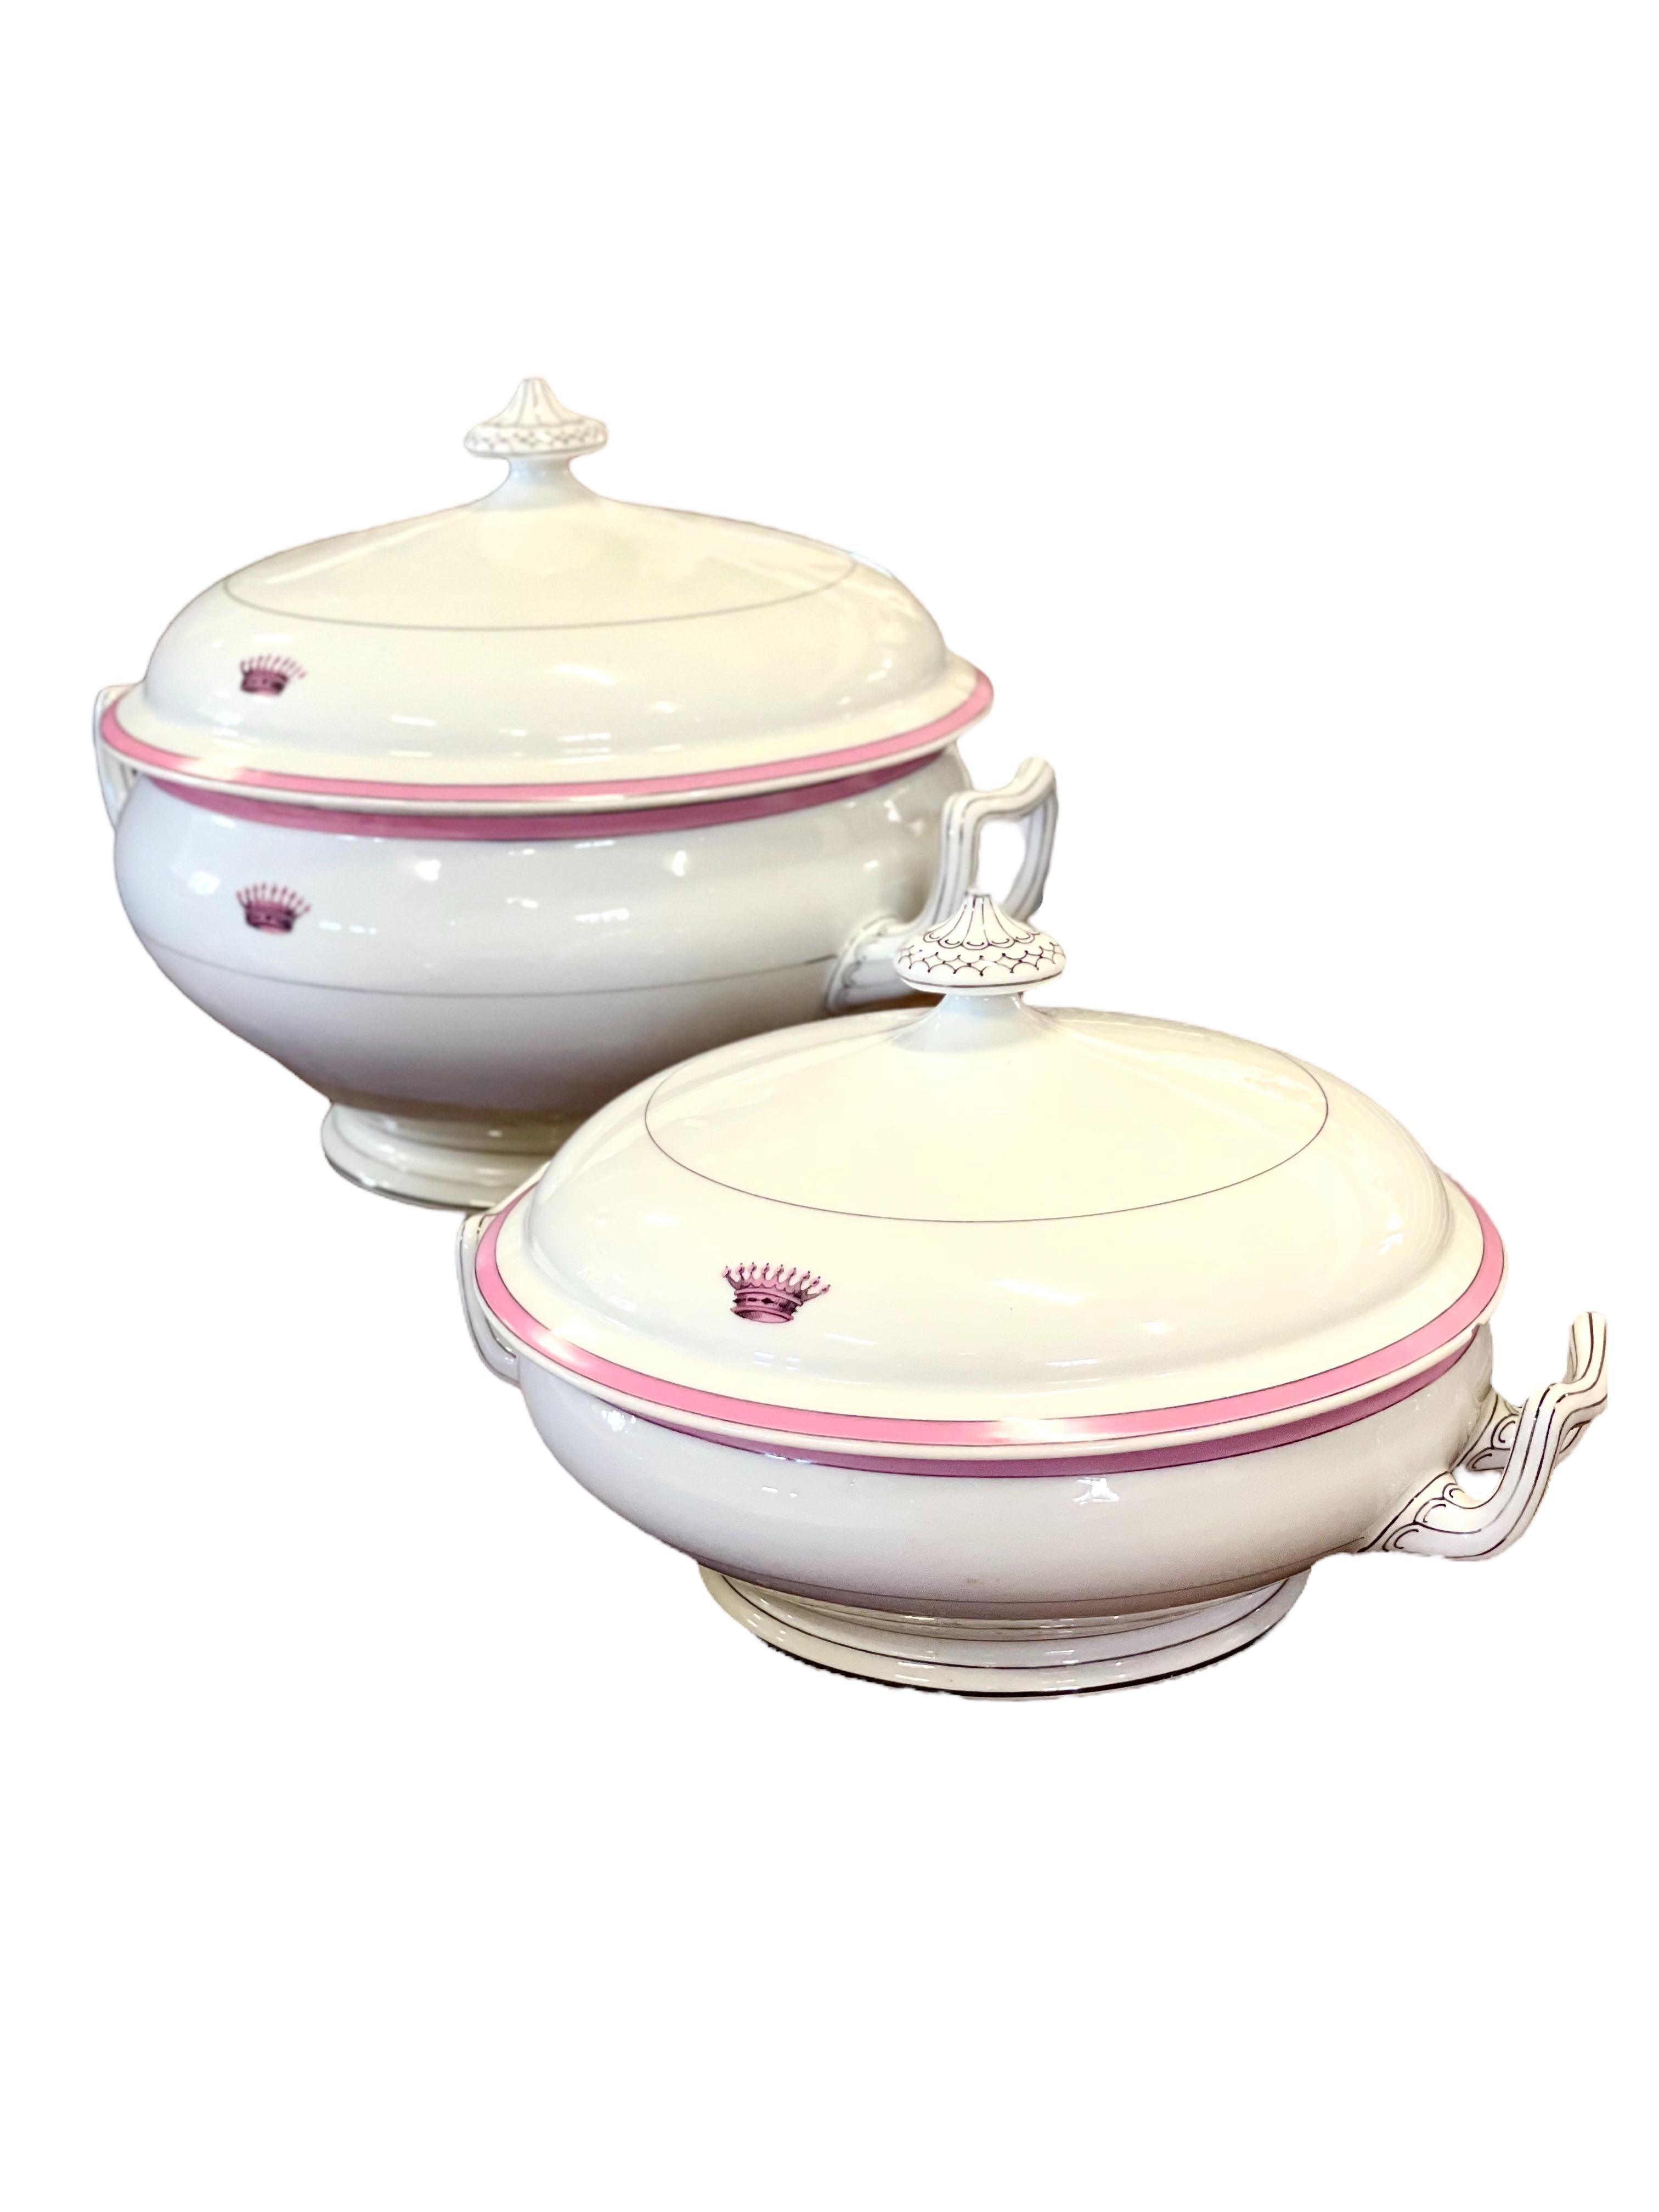 A gorgeous dinner service from the Maison Charles Pillivuyt et Cie, a manufacturer of high-quality porcelain founded in 1818. Each piece is hand-painted with a delicate rose- pink border and features an elegant coronet monogram. The undersides are